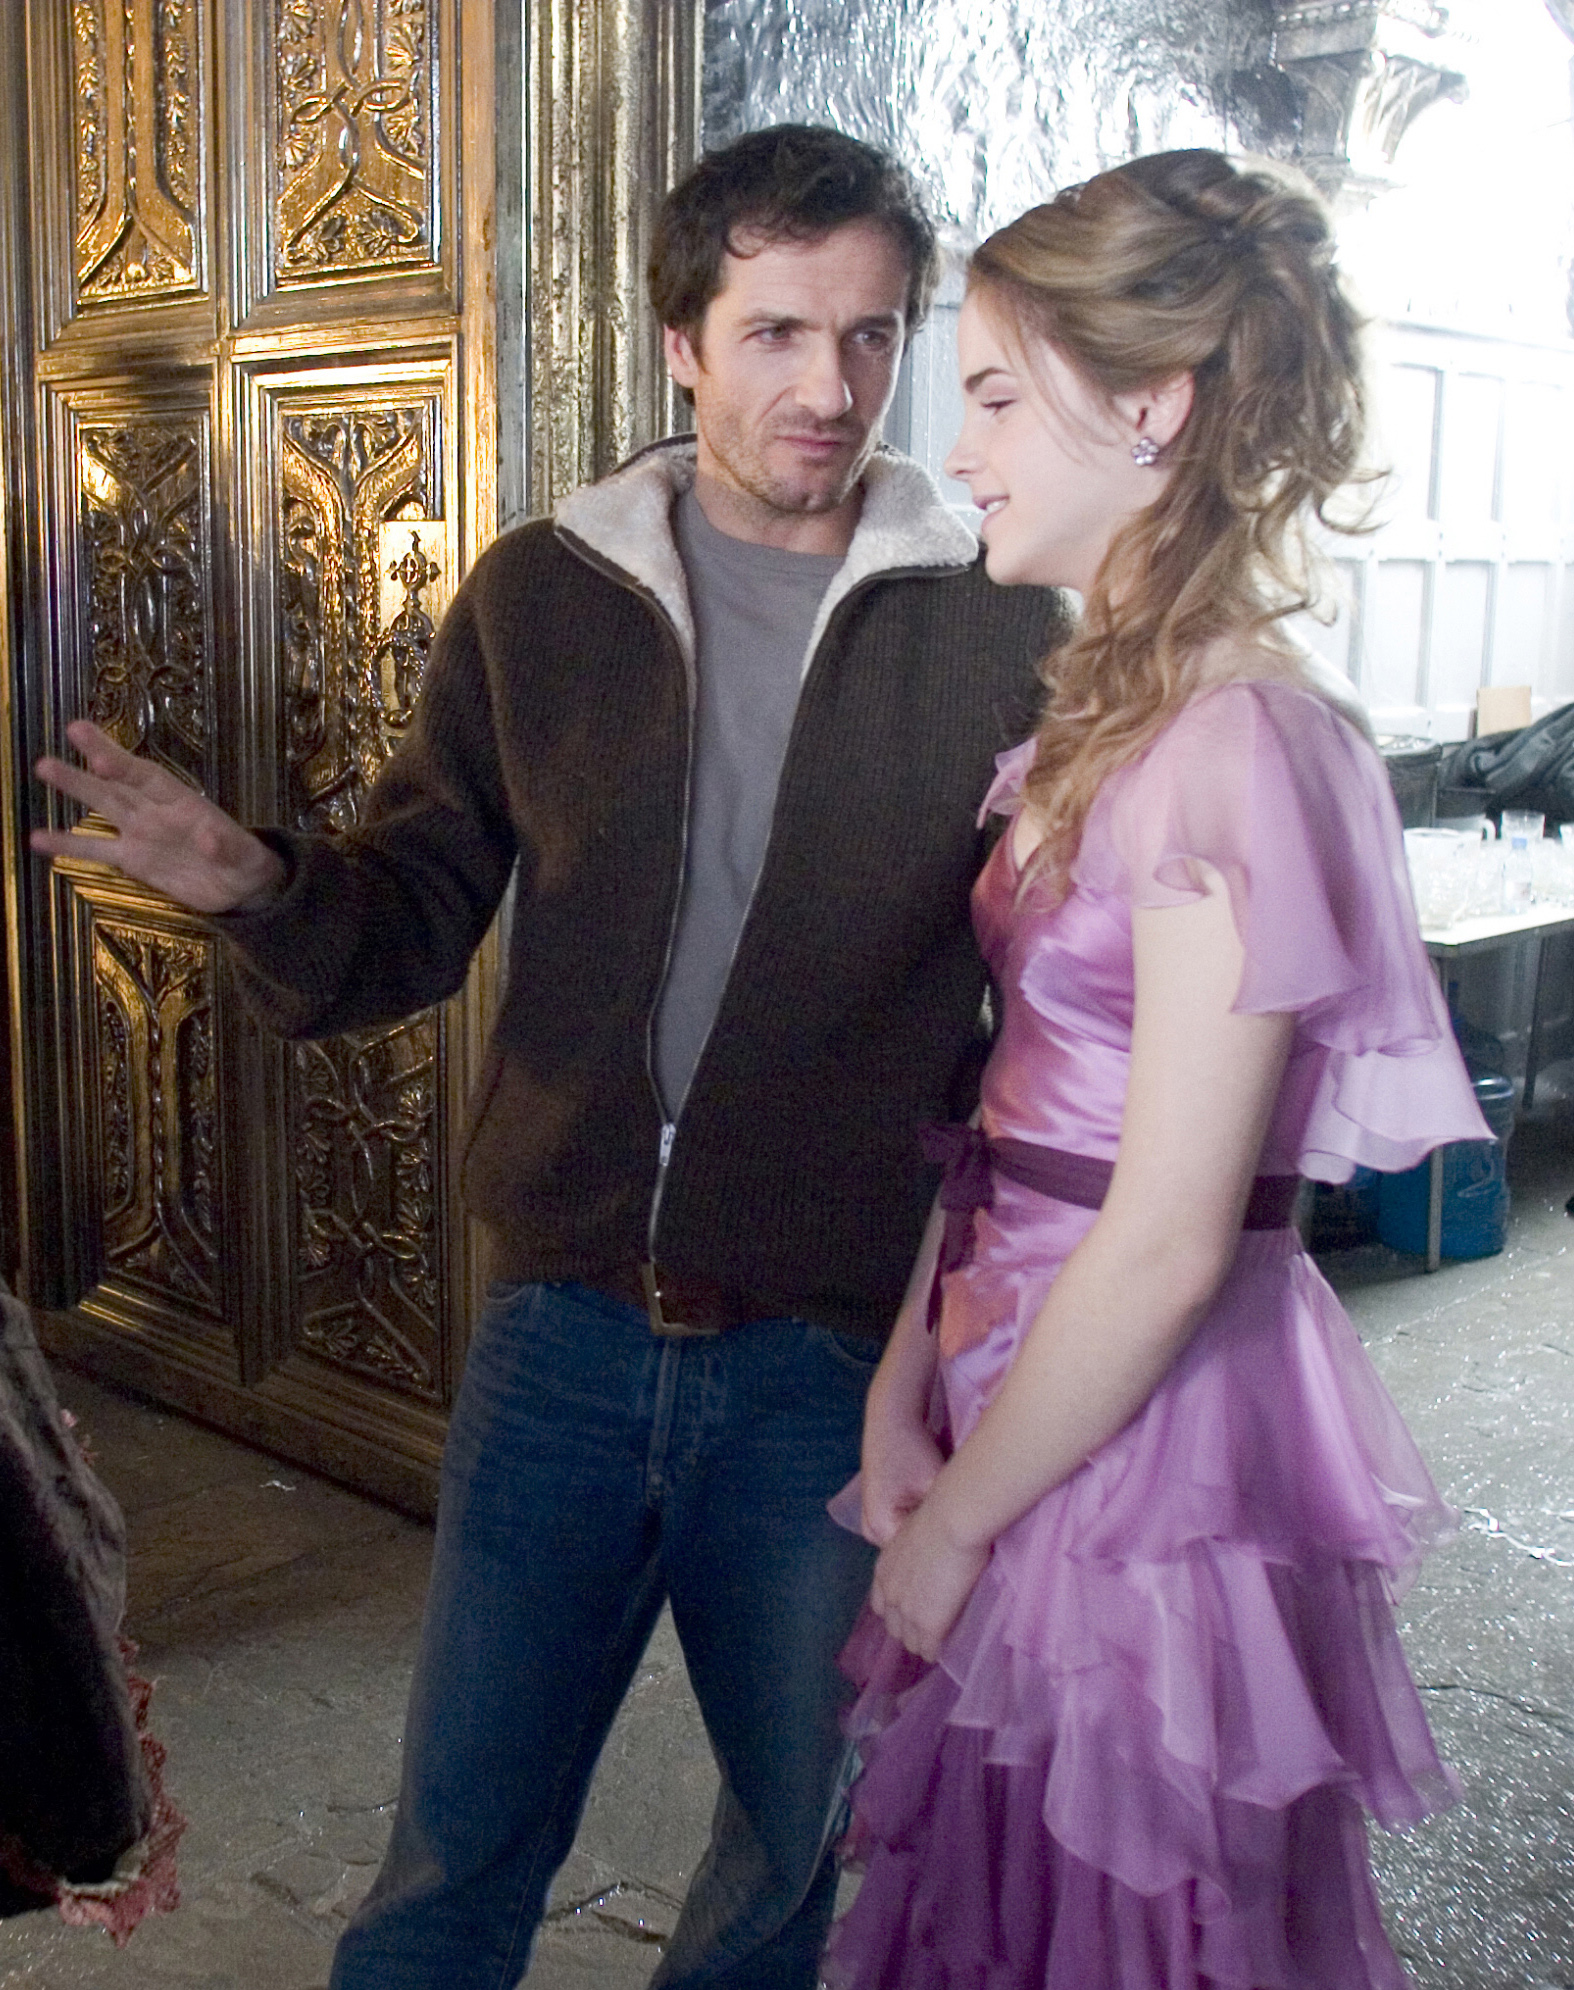 Harry Potter and the Goblet of Fire, Hermione Granger, Emma Watson, David Heyman